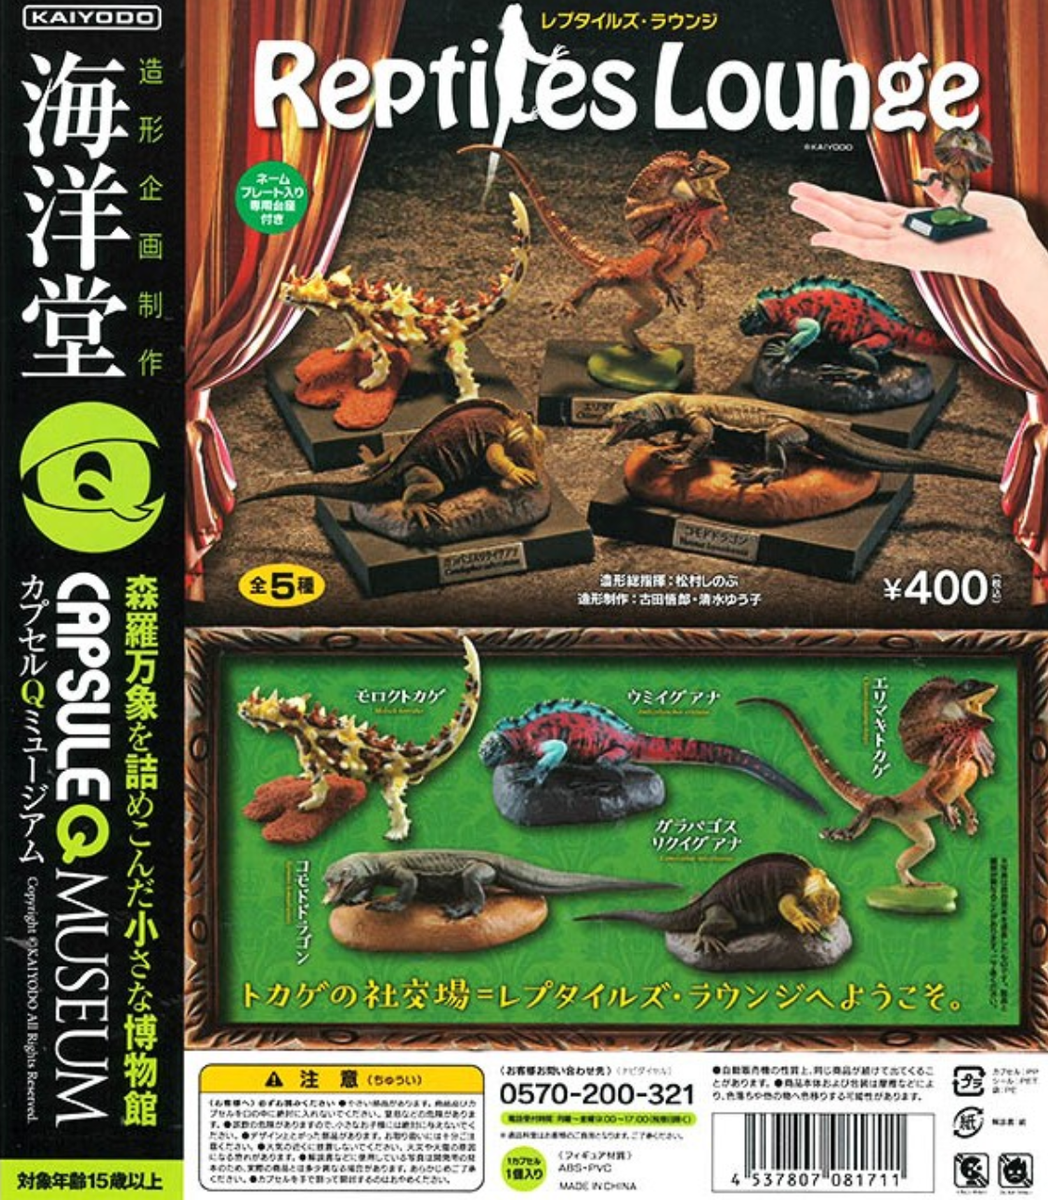 KAIYODO Capsule Q Museum Reptiles Lounge Complete All 5 type Figure